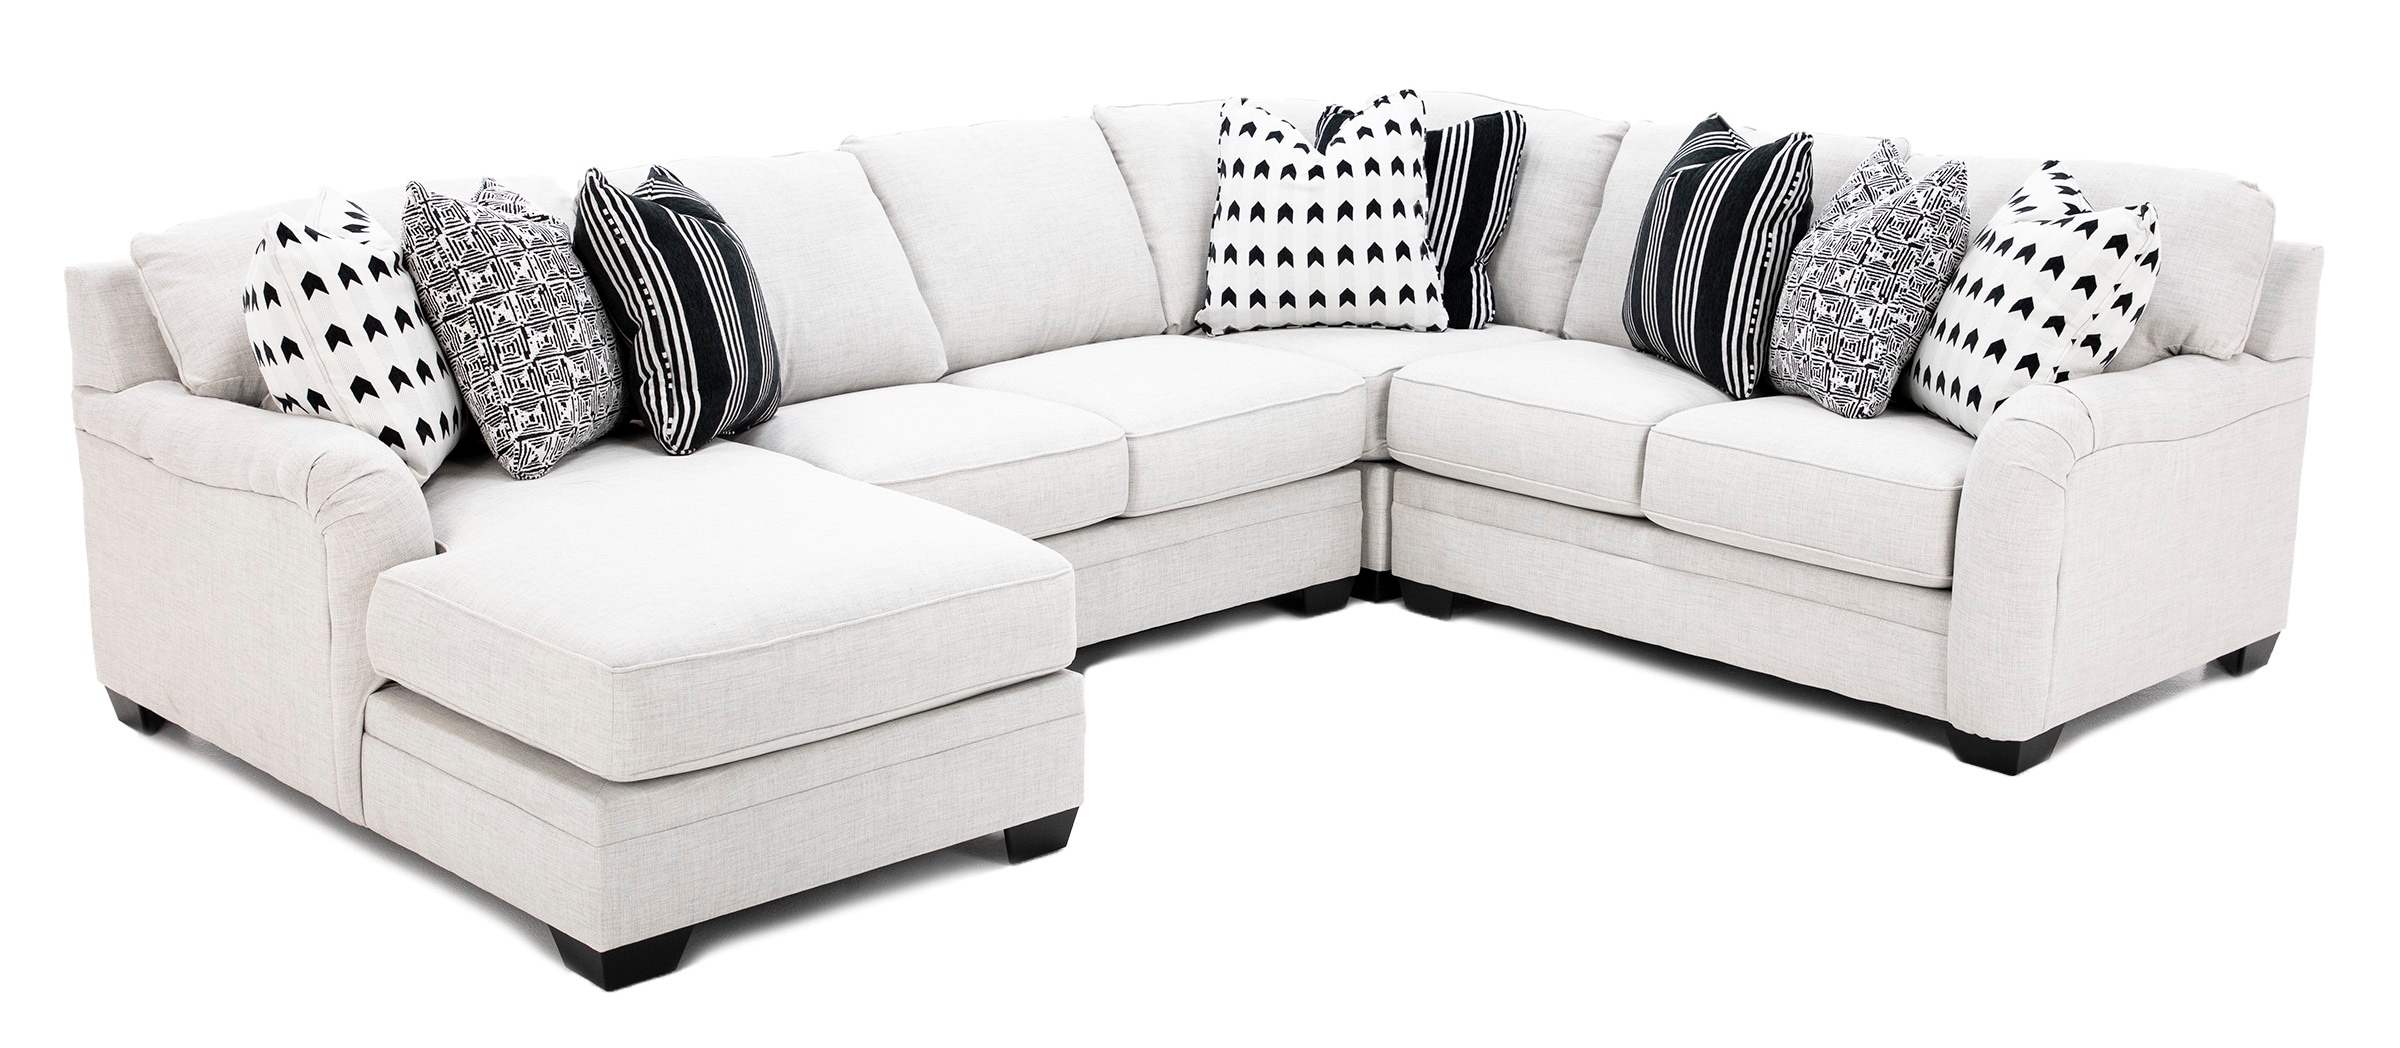 Evelyn 4-Pc. Sectional | Steinhafels